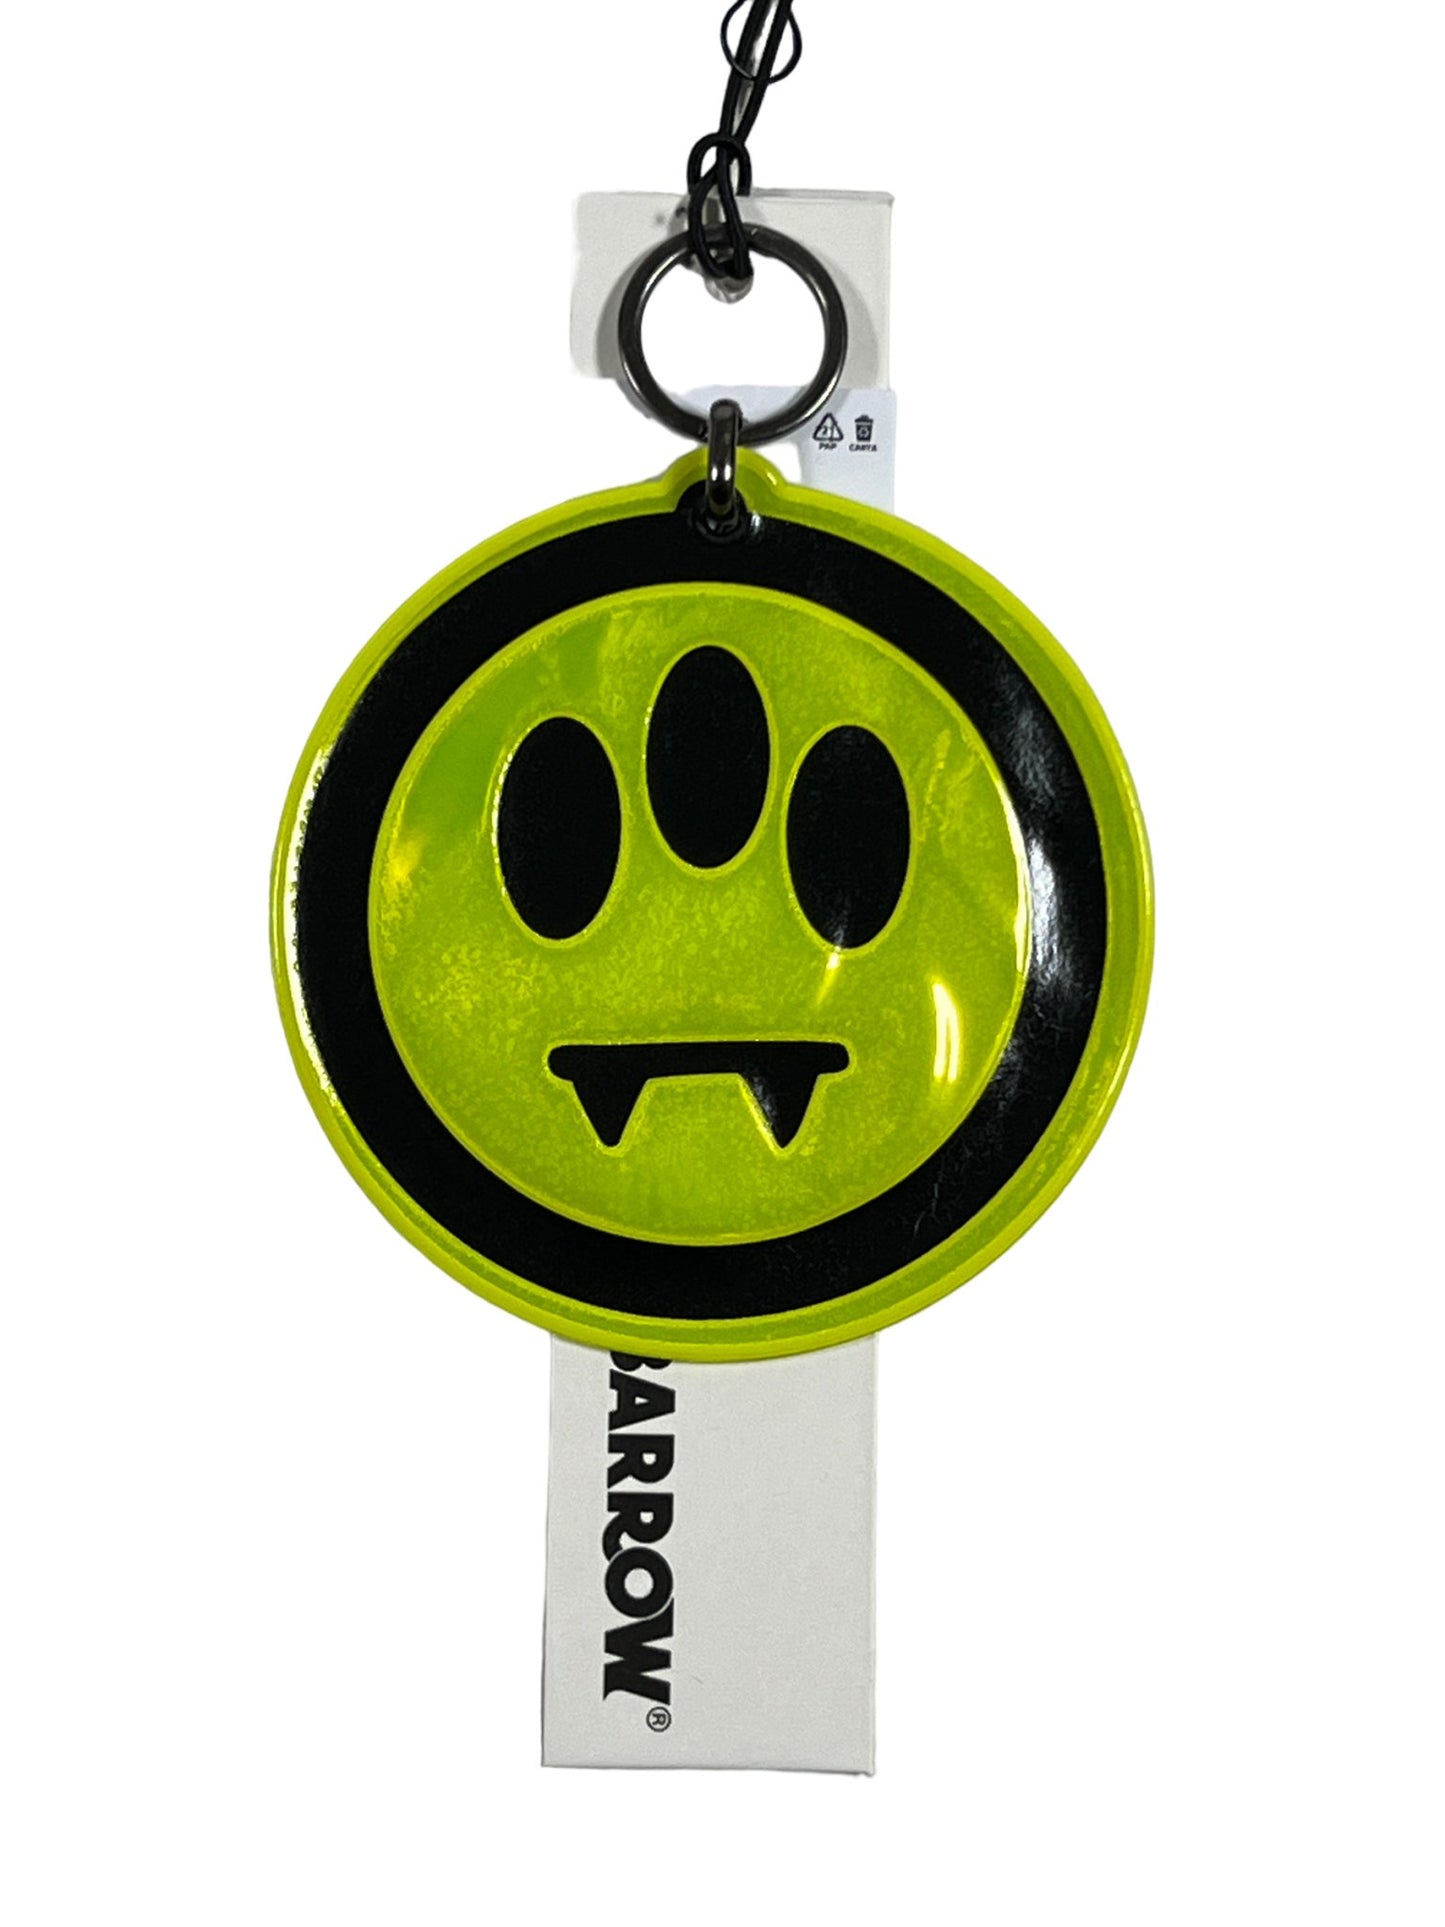 A neon yellow BARROW keychain with a black rim and a design featuring a paw print and a dripping effect, made in Italy.